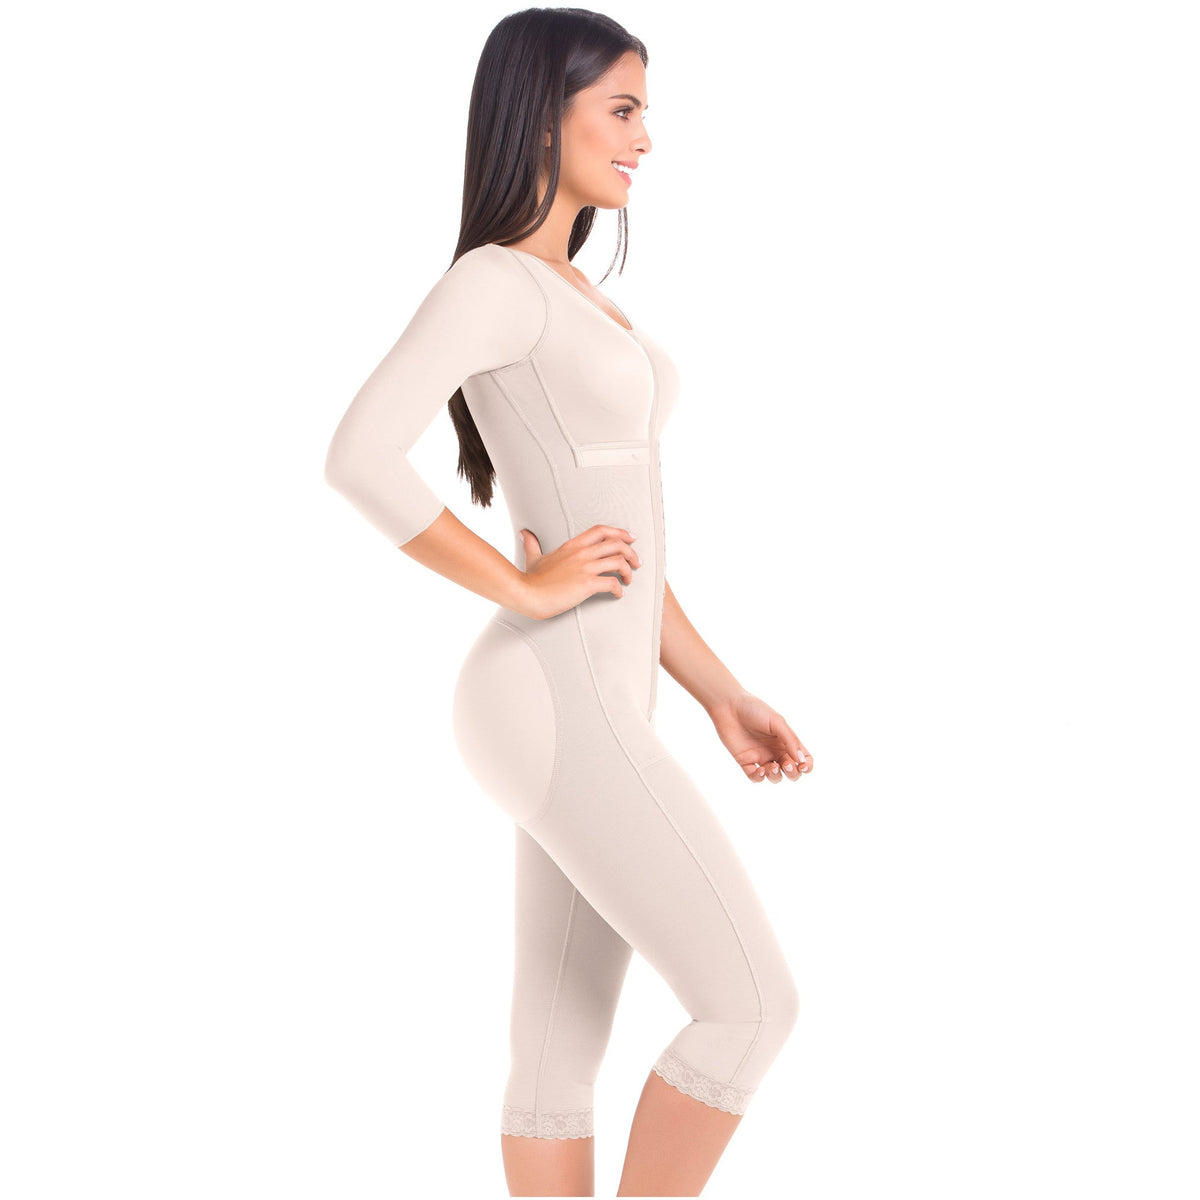 Post Surgery Full Body Shapewear with Sleeves | Powernet MariaE Fajas 9562